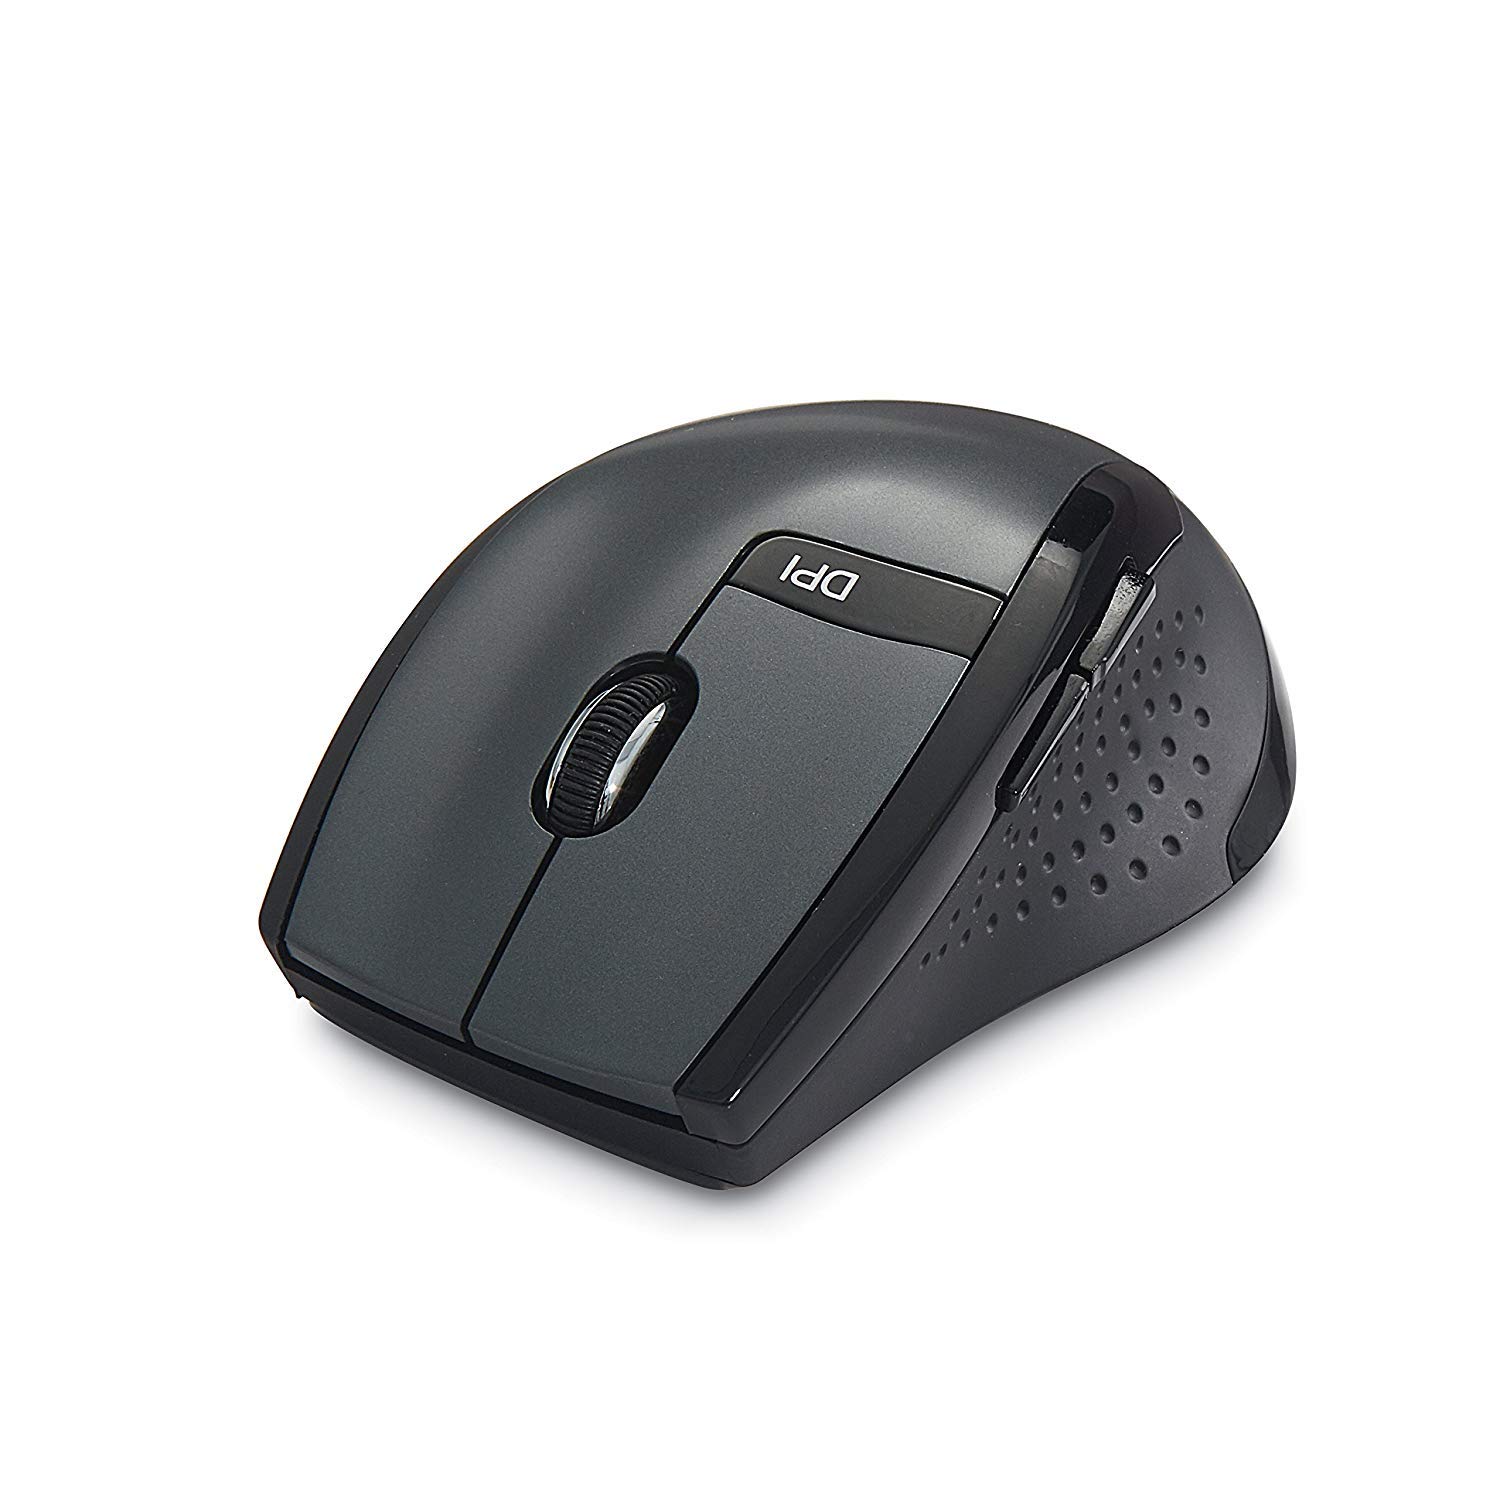 Verbatim Wireless Multimedia Keyboard and 6-Button Mouse Combo - Black